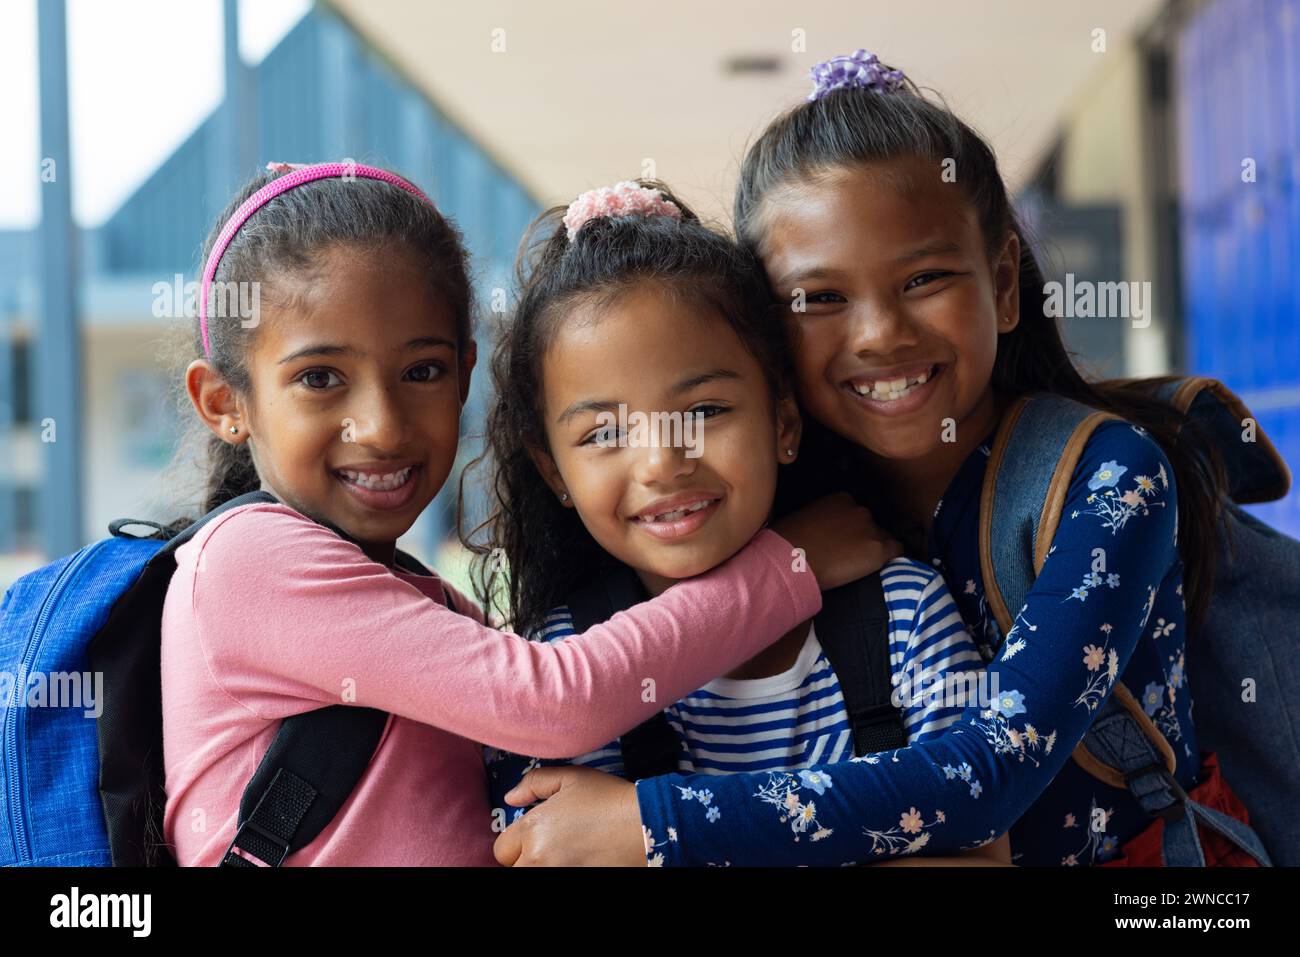 Three biracial girls are smiling and embracing in a school setting Stock Photo